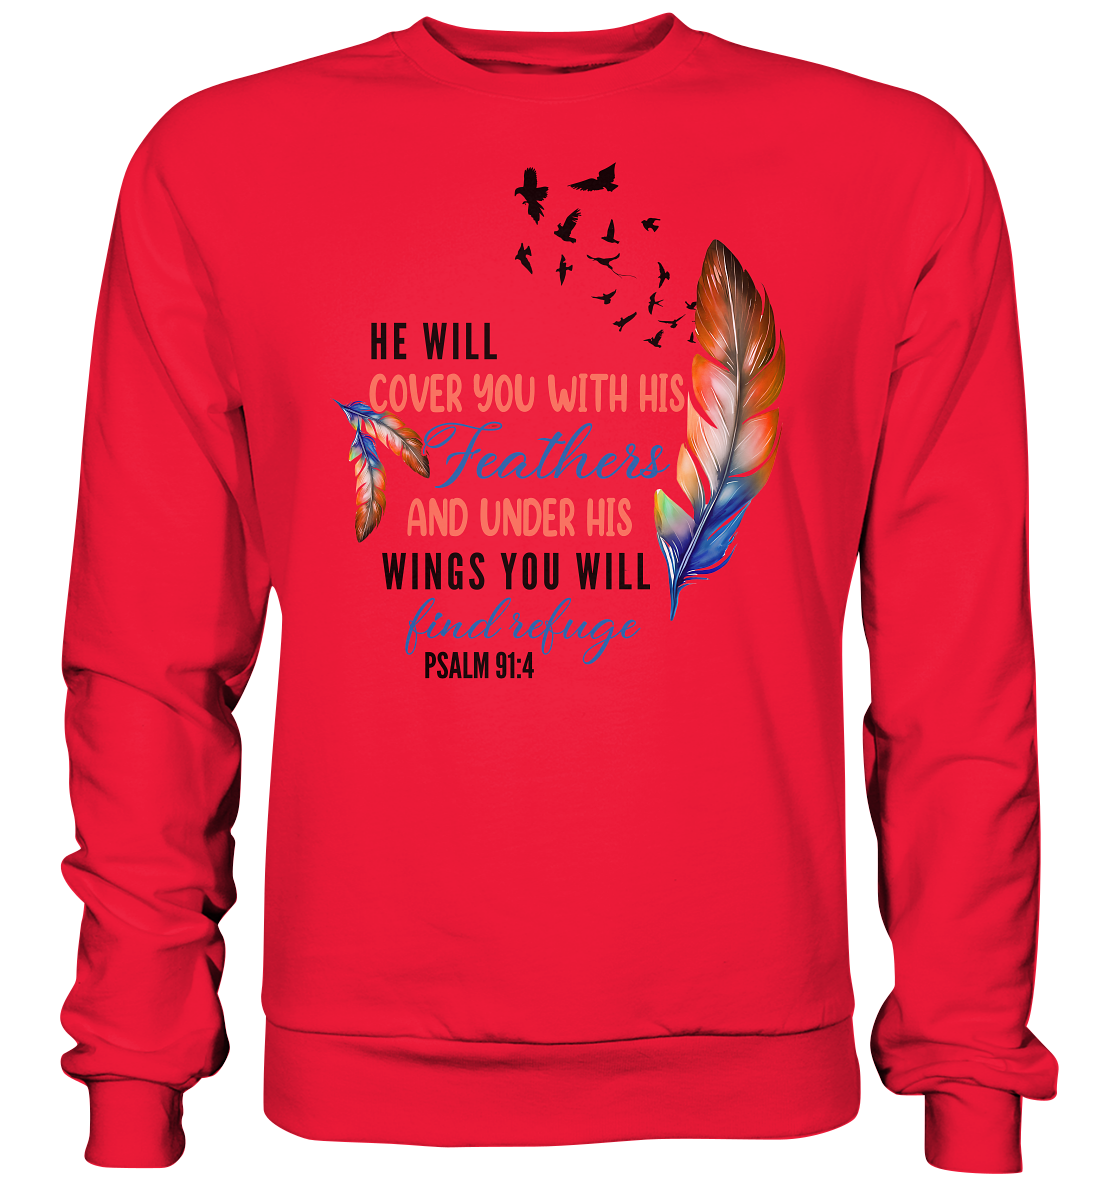 Psalm 91:4 - He will cover you with his Feathers - Premium Sweatshirt